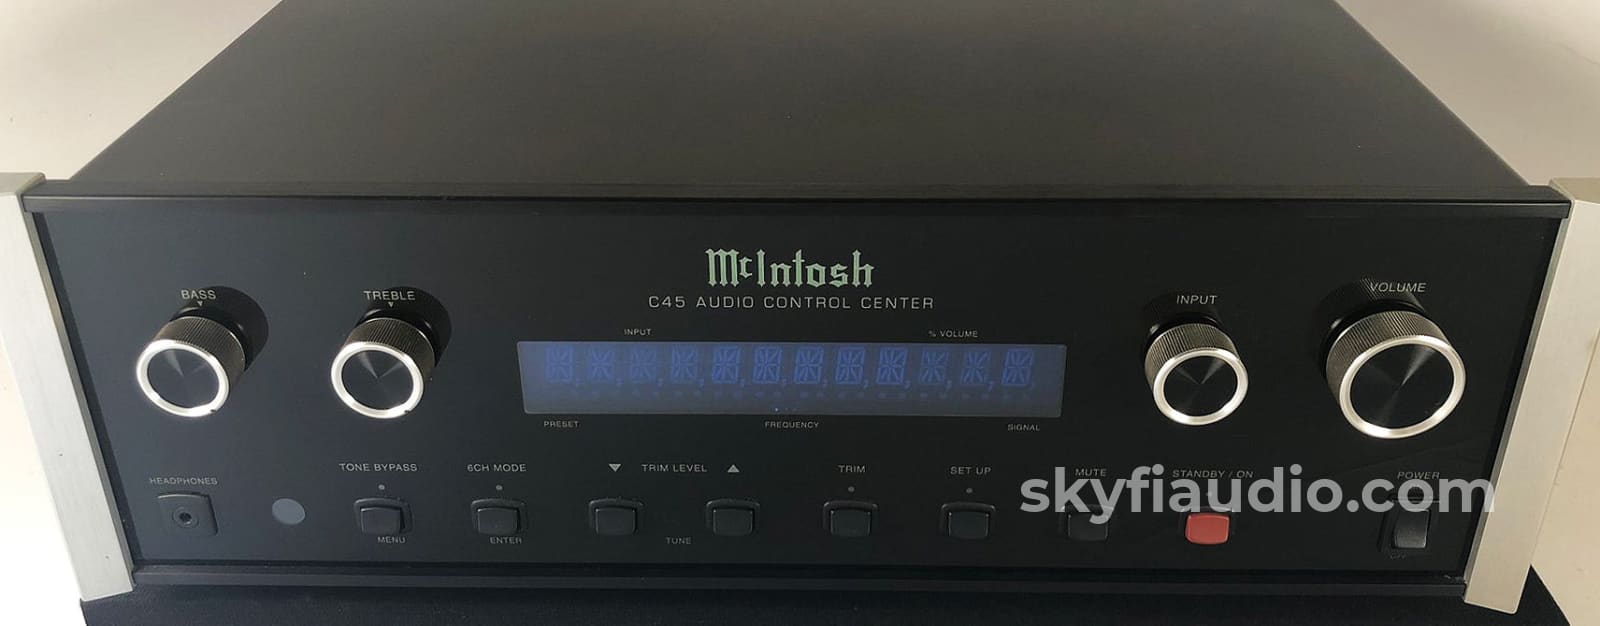 Mcintosh C45 Preamp - All Analog With Phono Input Preamplifier